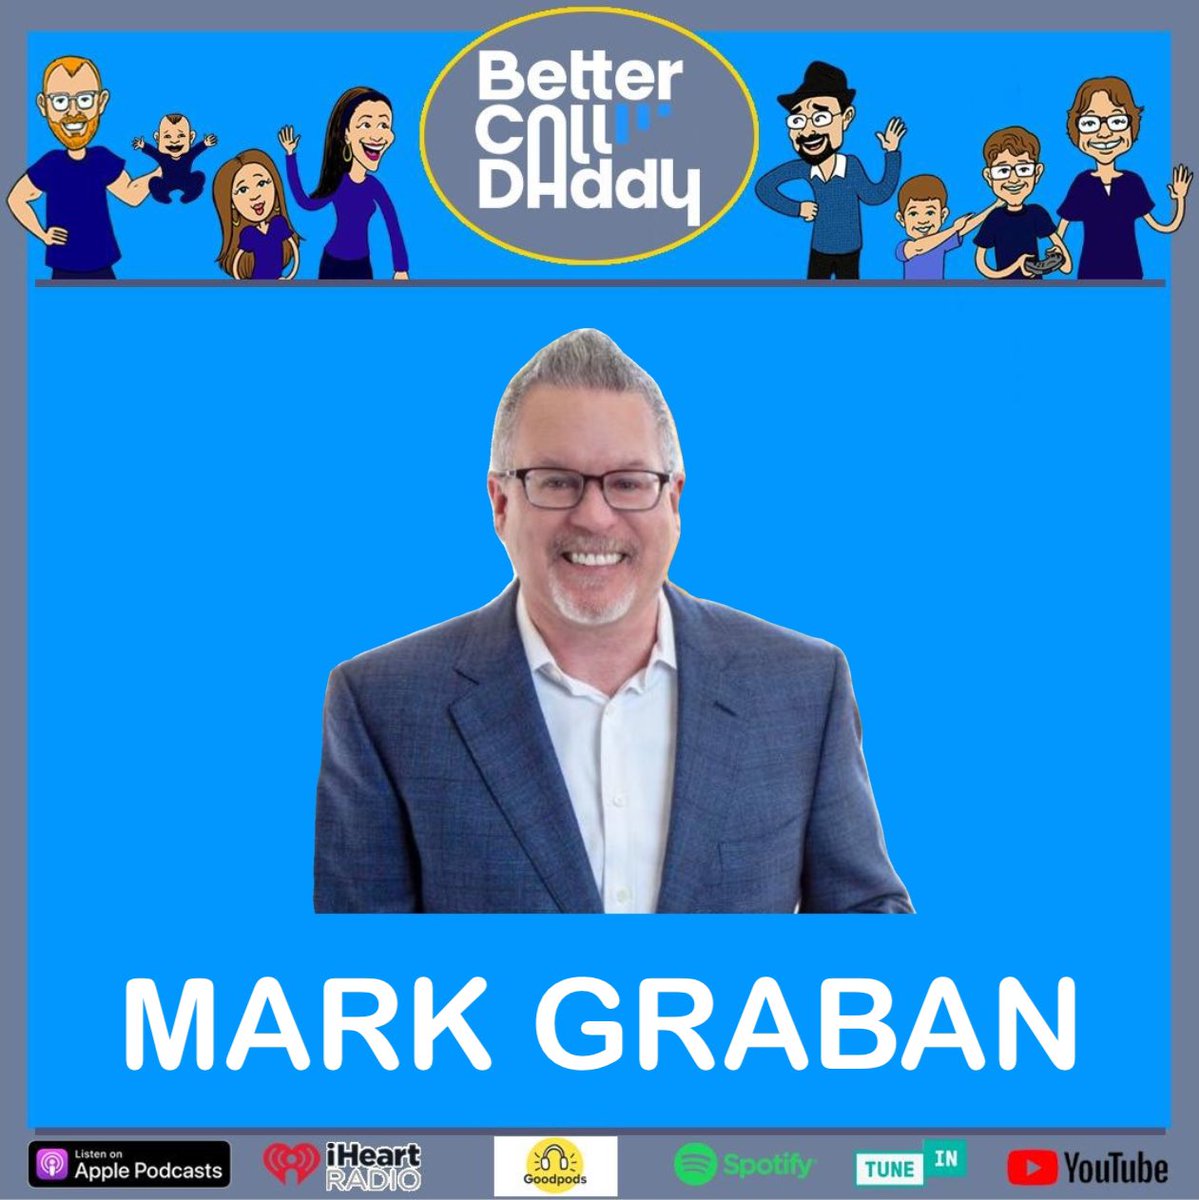 Ever wondered what makes a mistake actually a mistake?  In my latest @BetterCallDadd1 episode with @MarkGraban we talk about owning mistakes and learning from them! Have you made any mistakes lately? #PodcastAndChill #mistakes #podcastshow